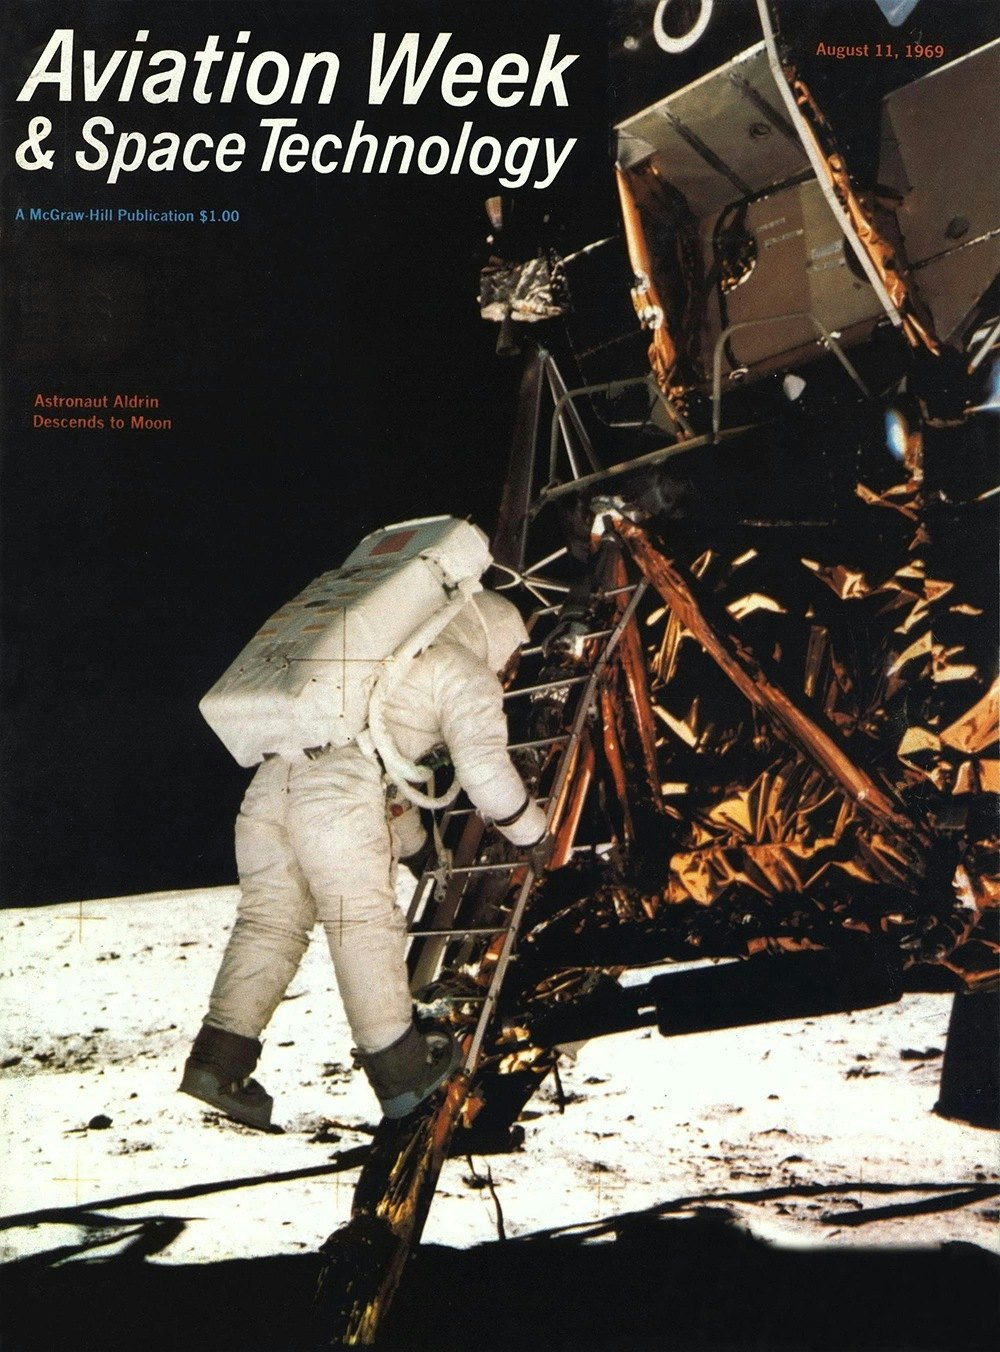 Aviation Week Space Technology Magazine 1959 Next Decade in Space Reprint 